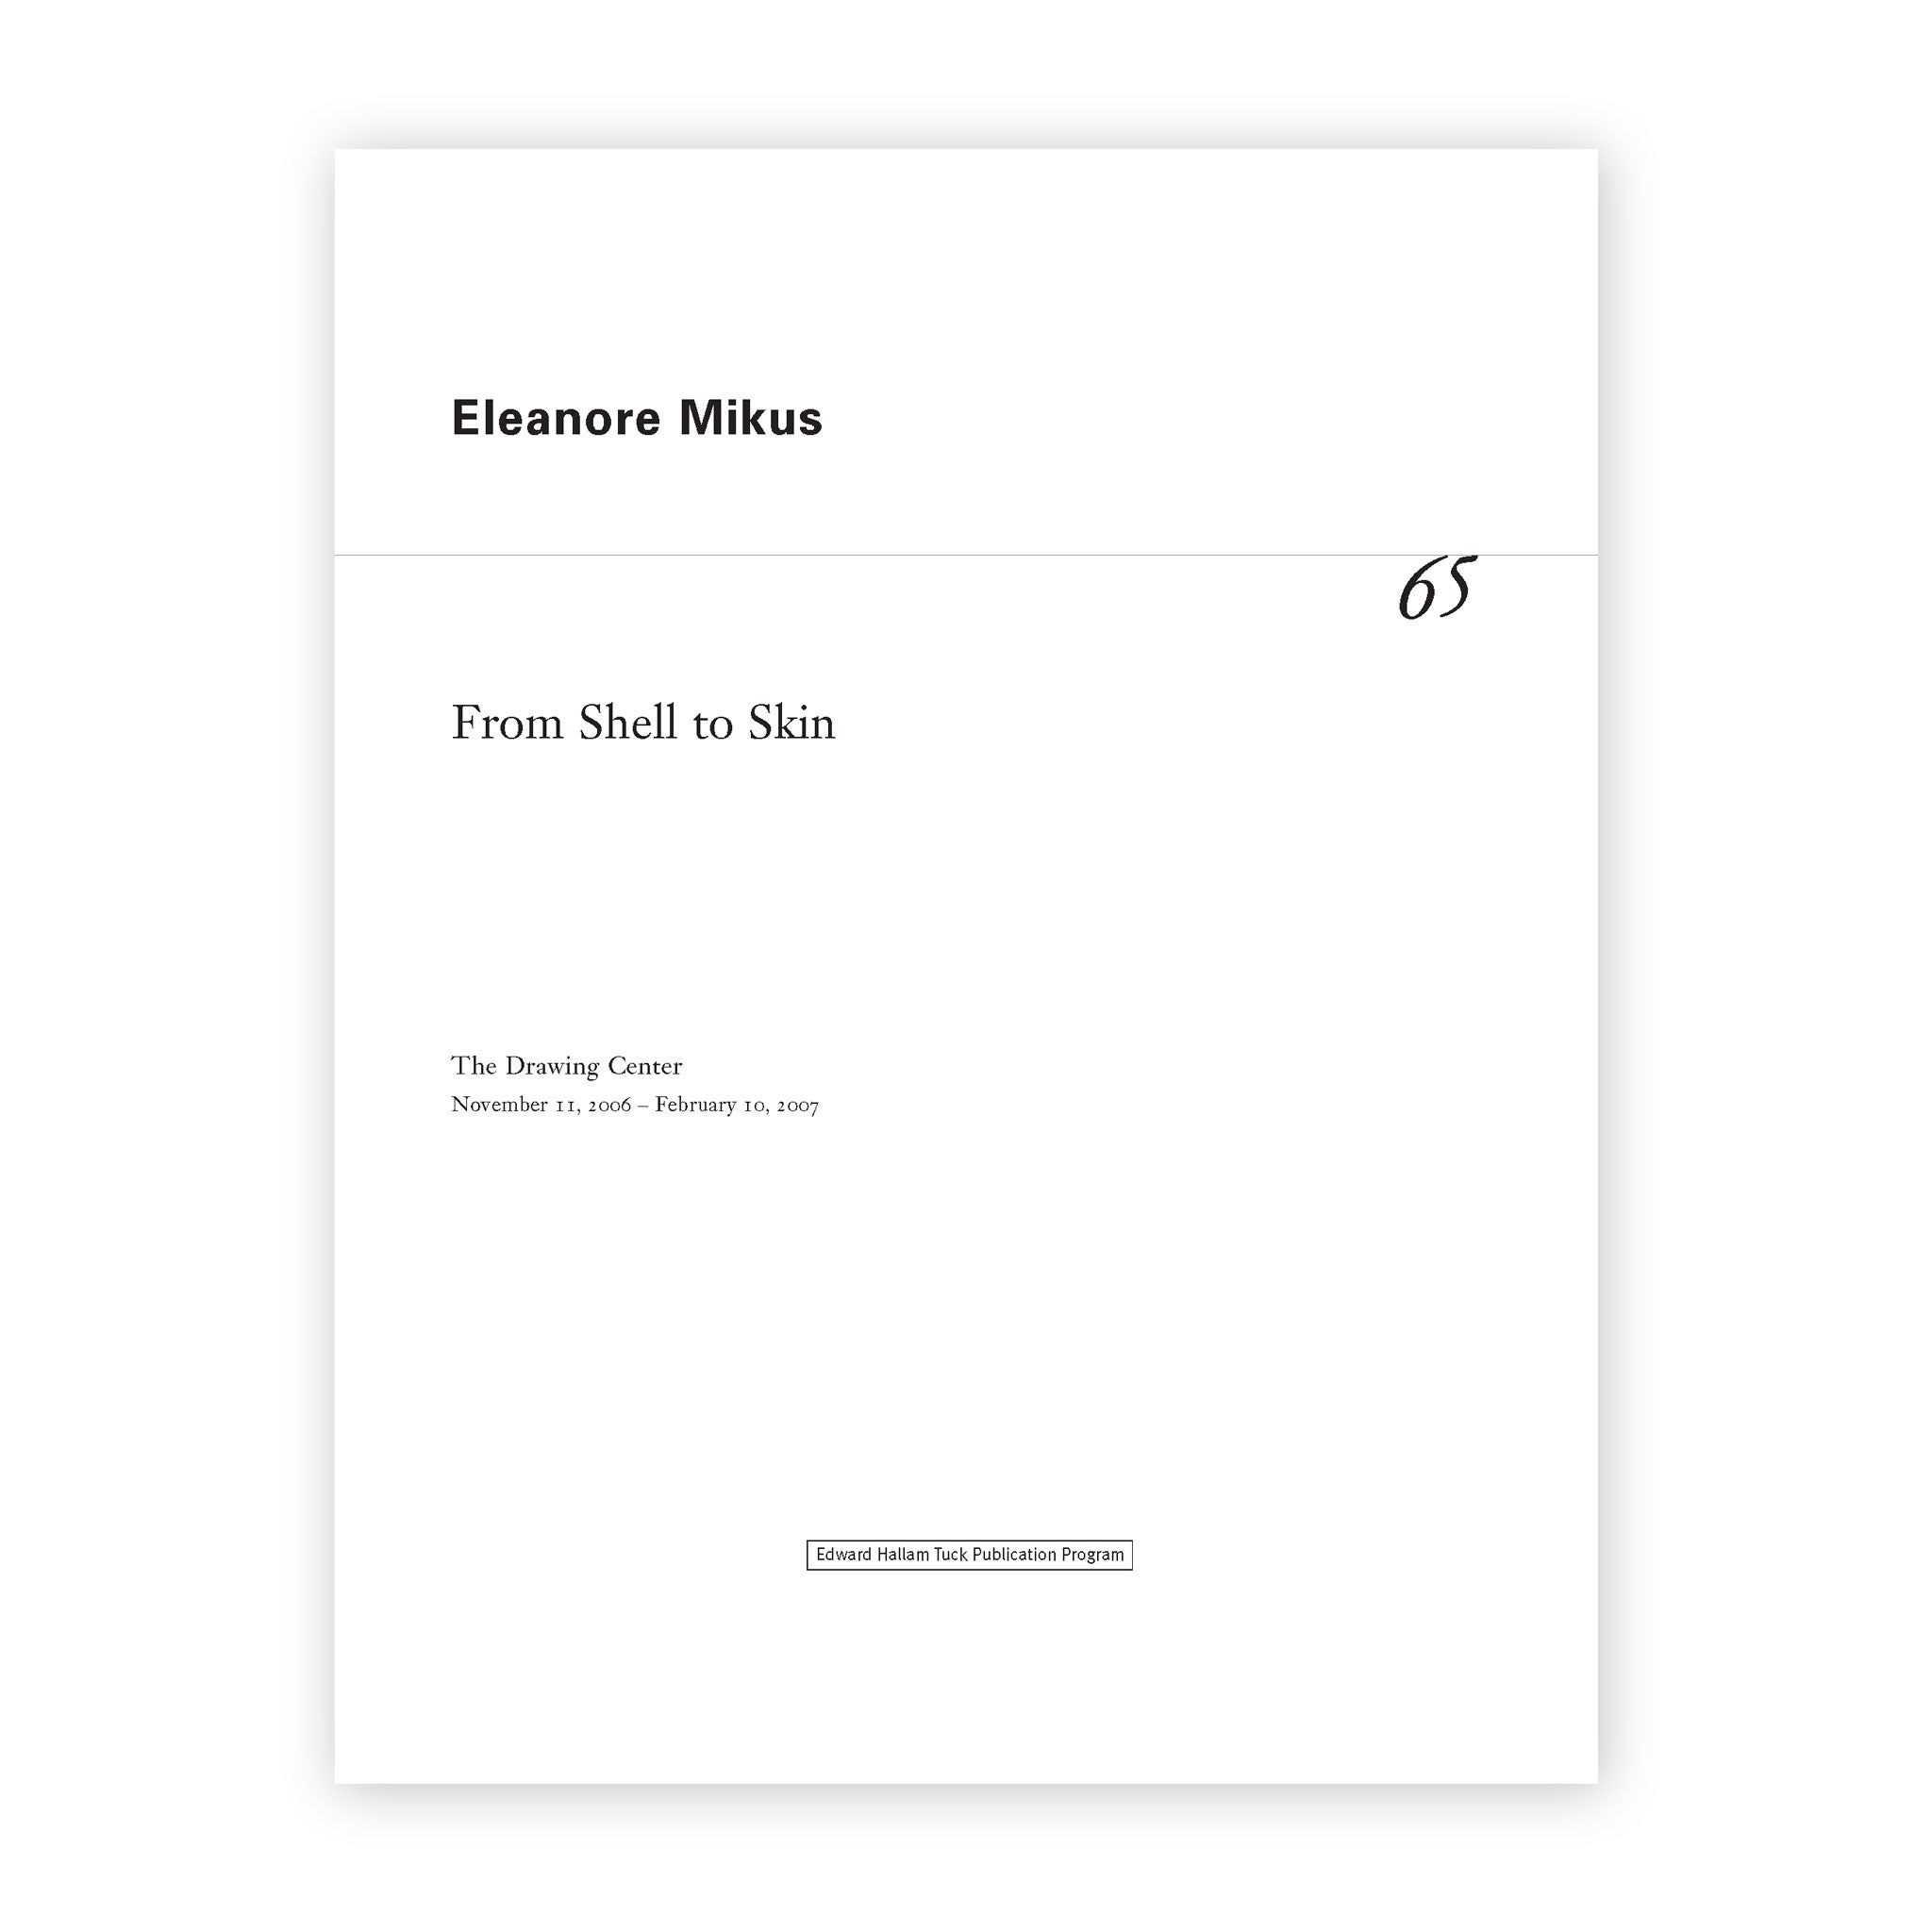 Front cover for "Eleanore Mikus: From Shell to Skin"